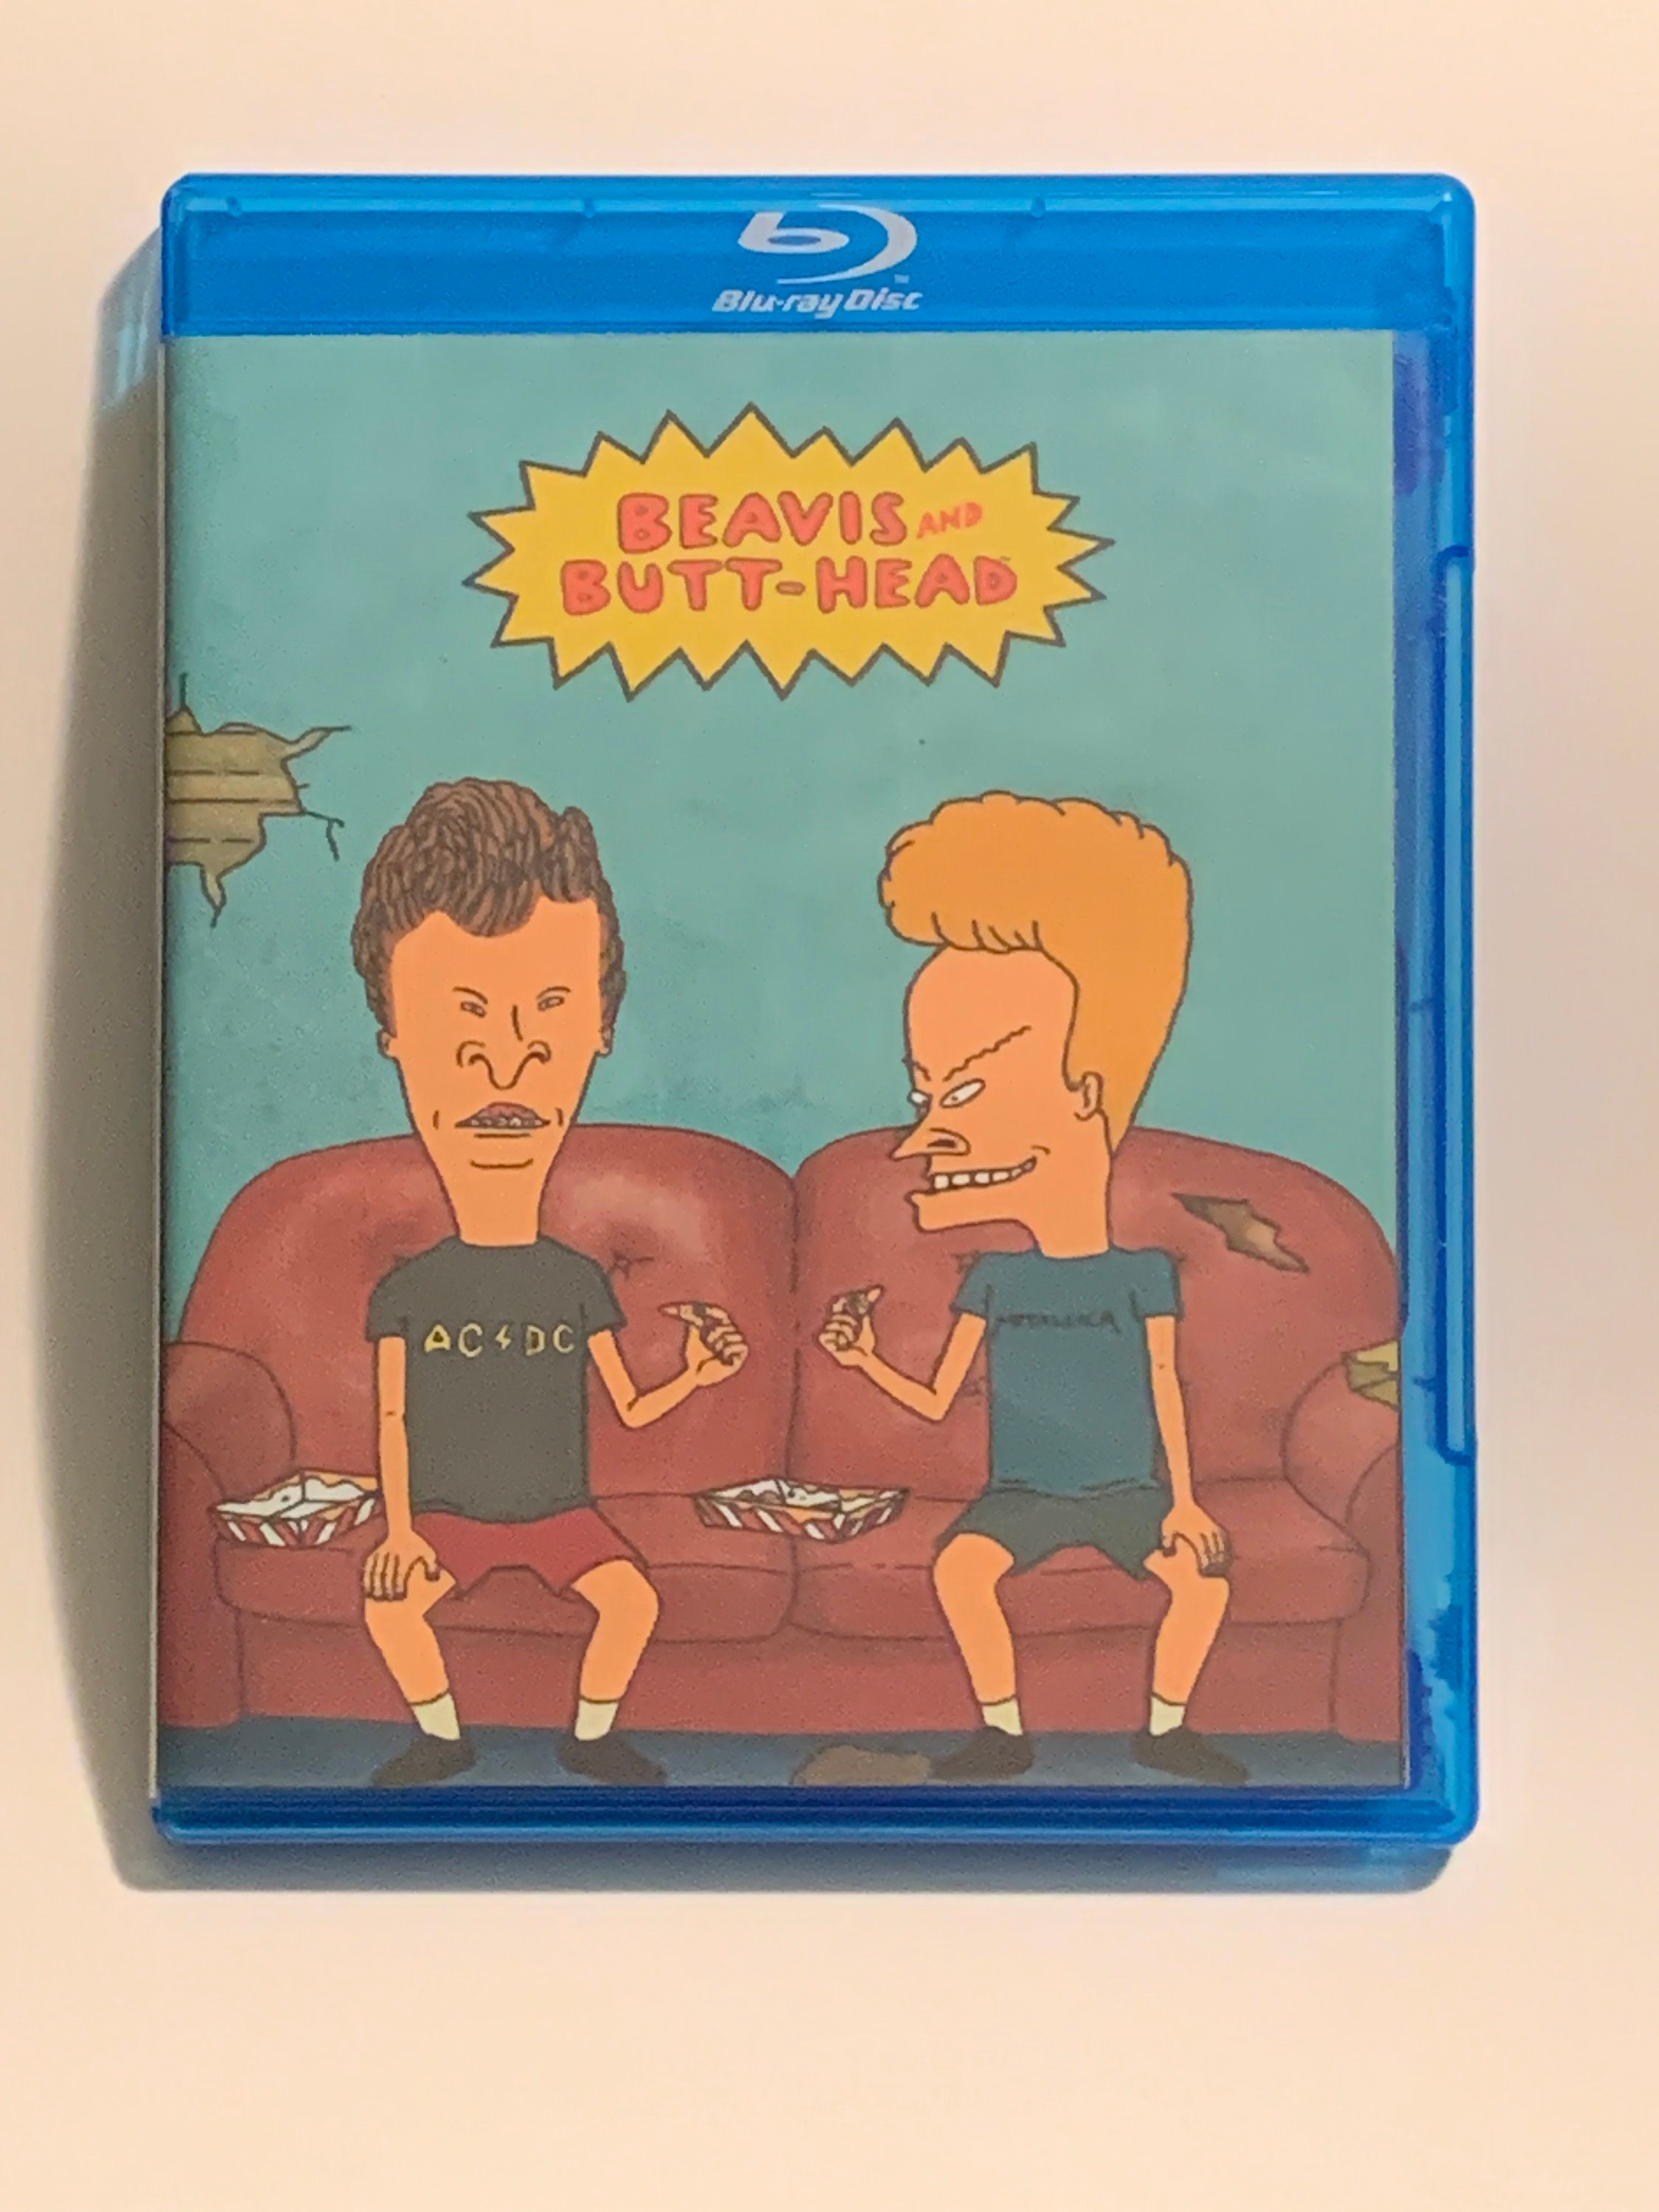 Beavis and Butt-head Complete Series 2 Disc Blu Ray Set - Etsy